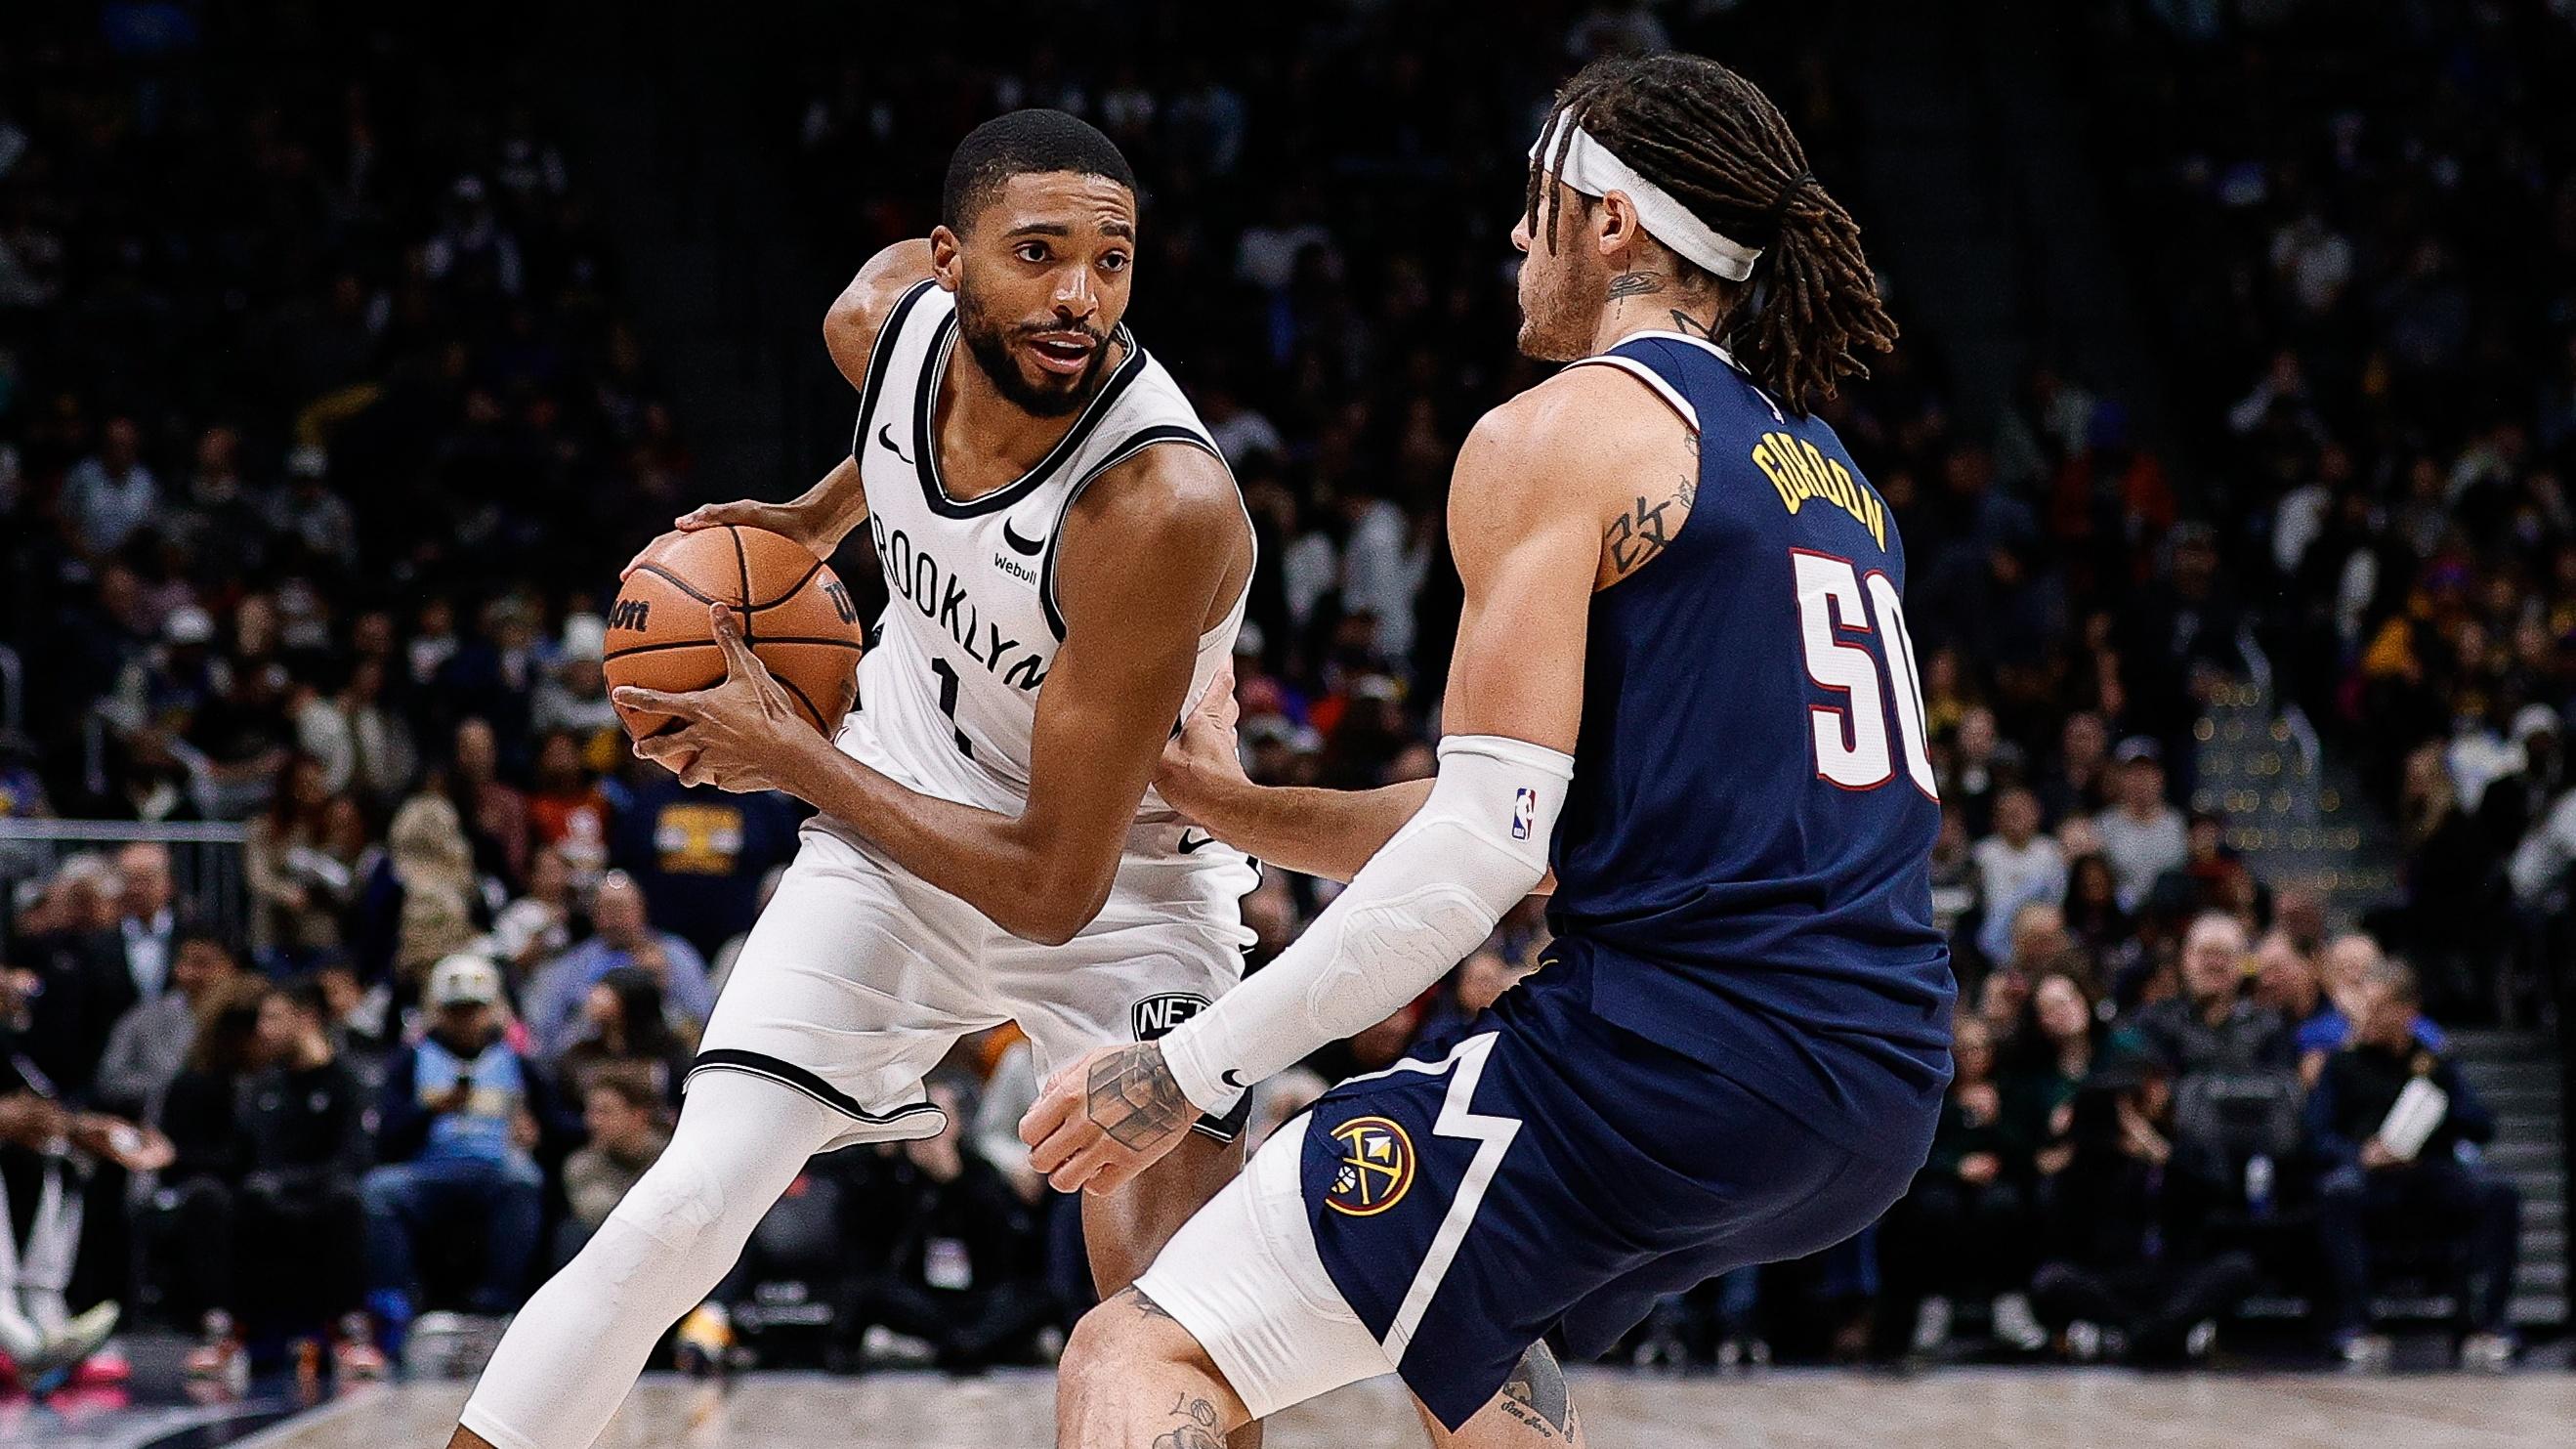 Brooklyn Nets forward Mikal Bridges (1) controls the ball as Denver Nuggets forward Aaron Gordon (50) guards in the first quarter at Ball Arena / Isaiah J. Downing - USA TODAY Sports